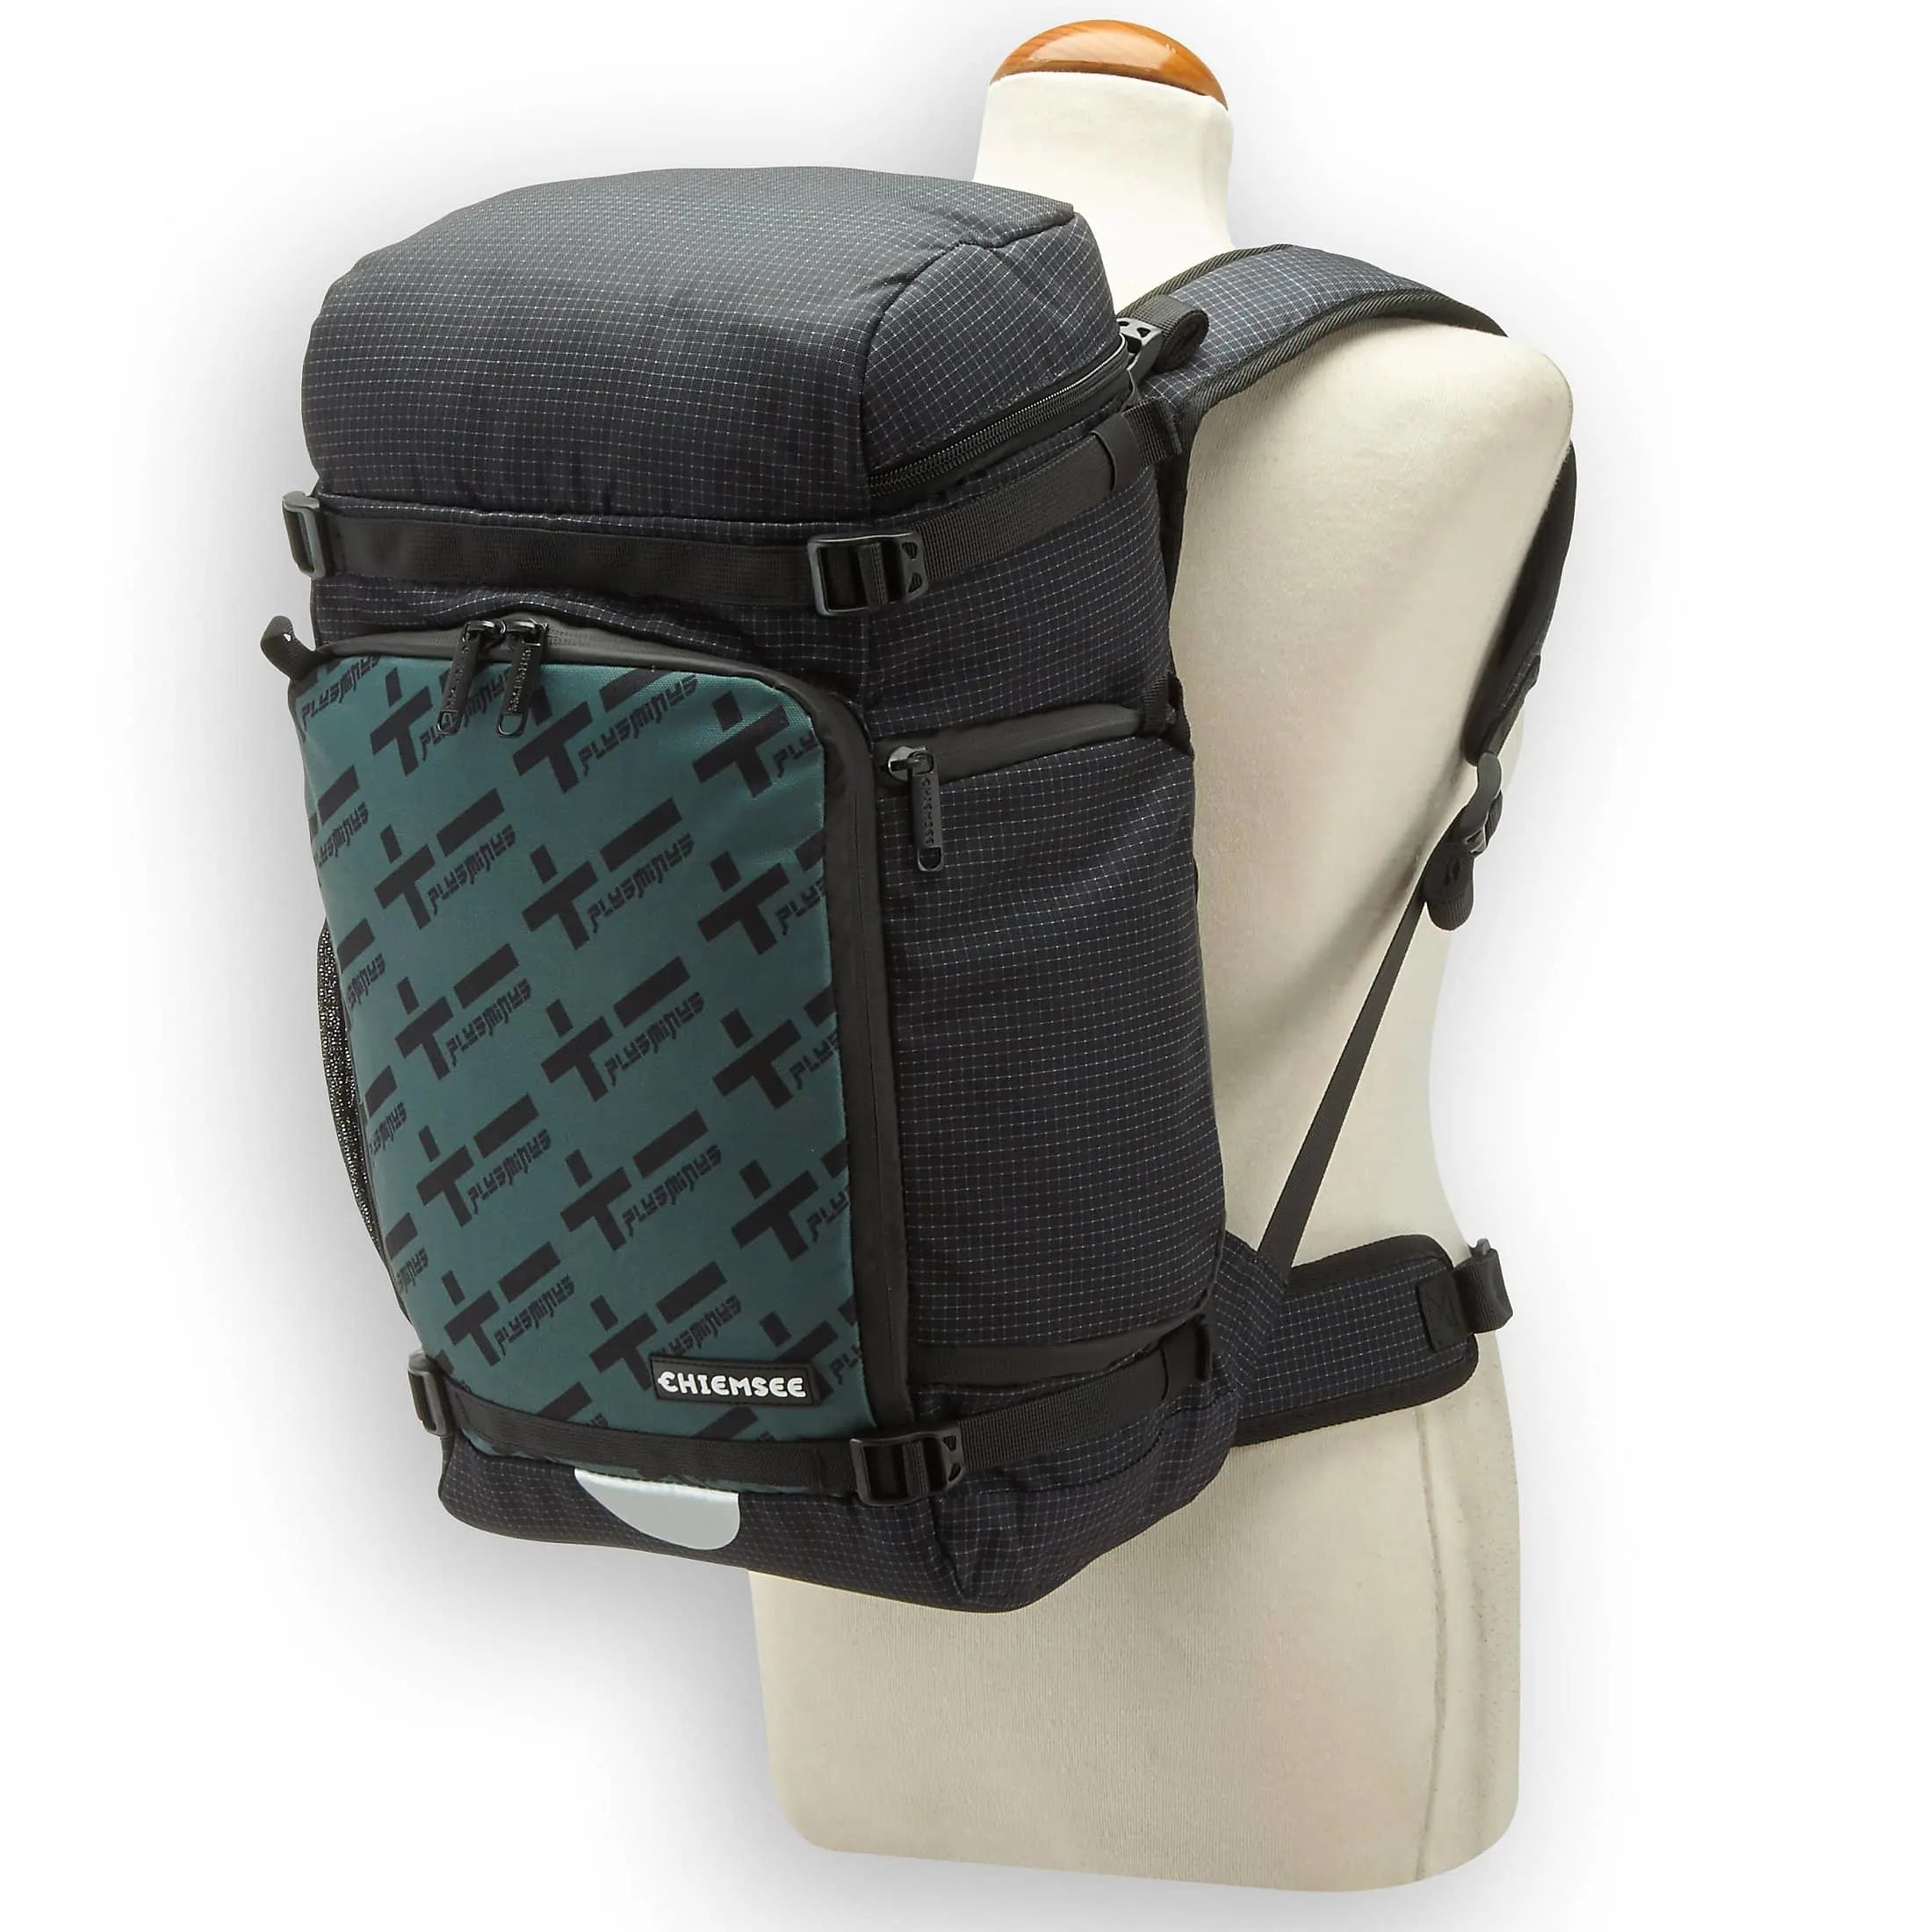 Chiemsee Sports & Travel Bags Stan Backpack 48 cm - dark green-sand